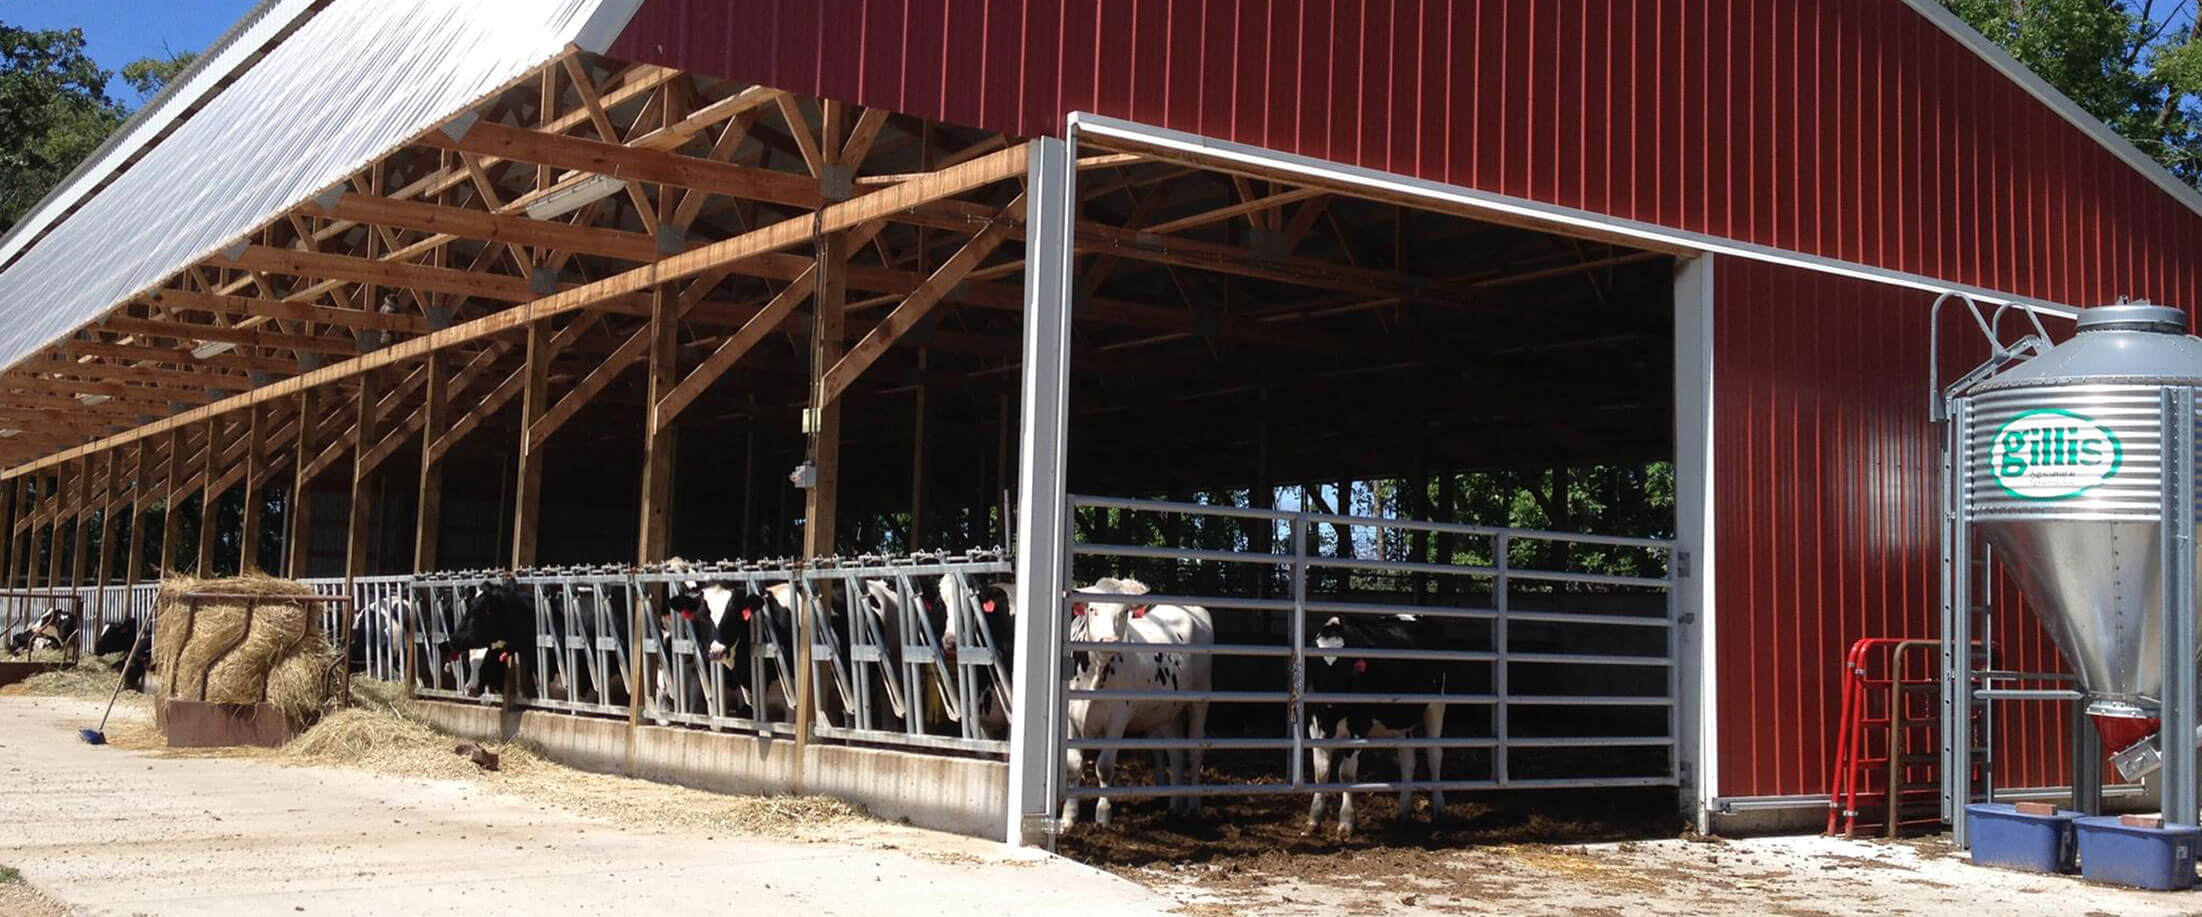 Agricultural calf barn built using materials supplied by Lifestyle Lumber